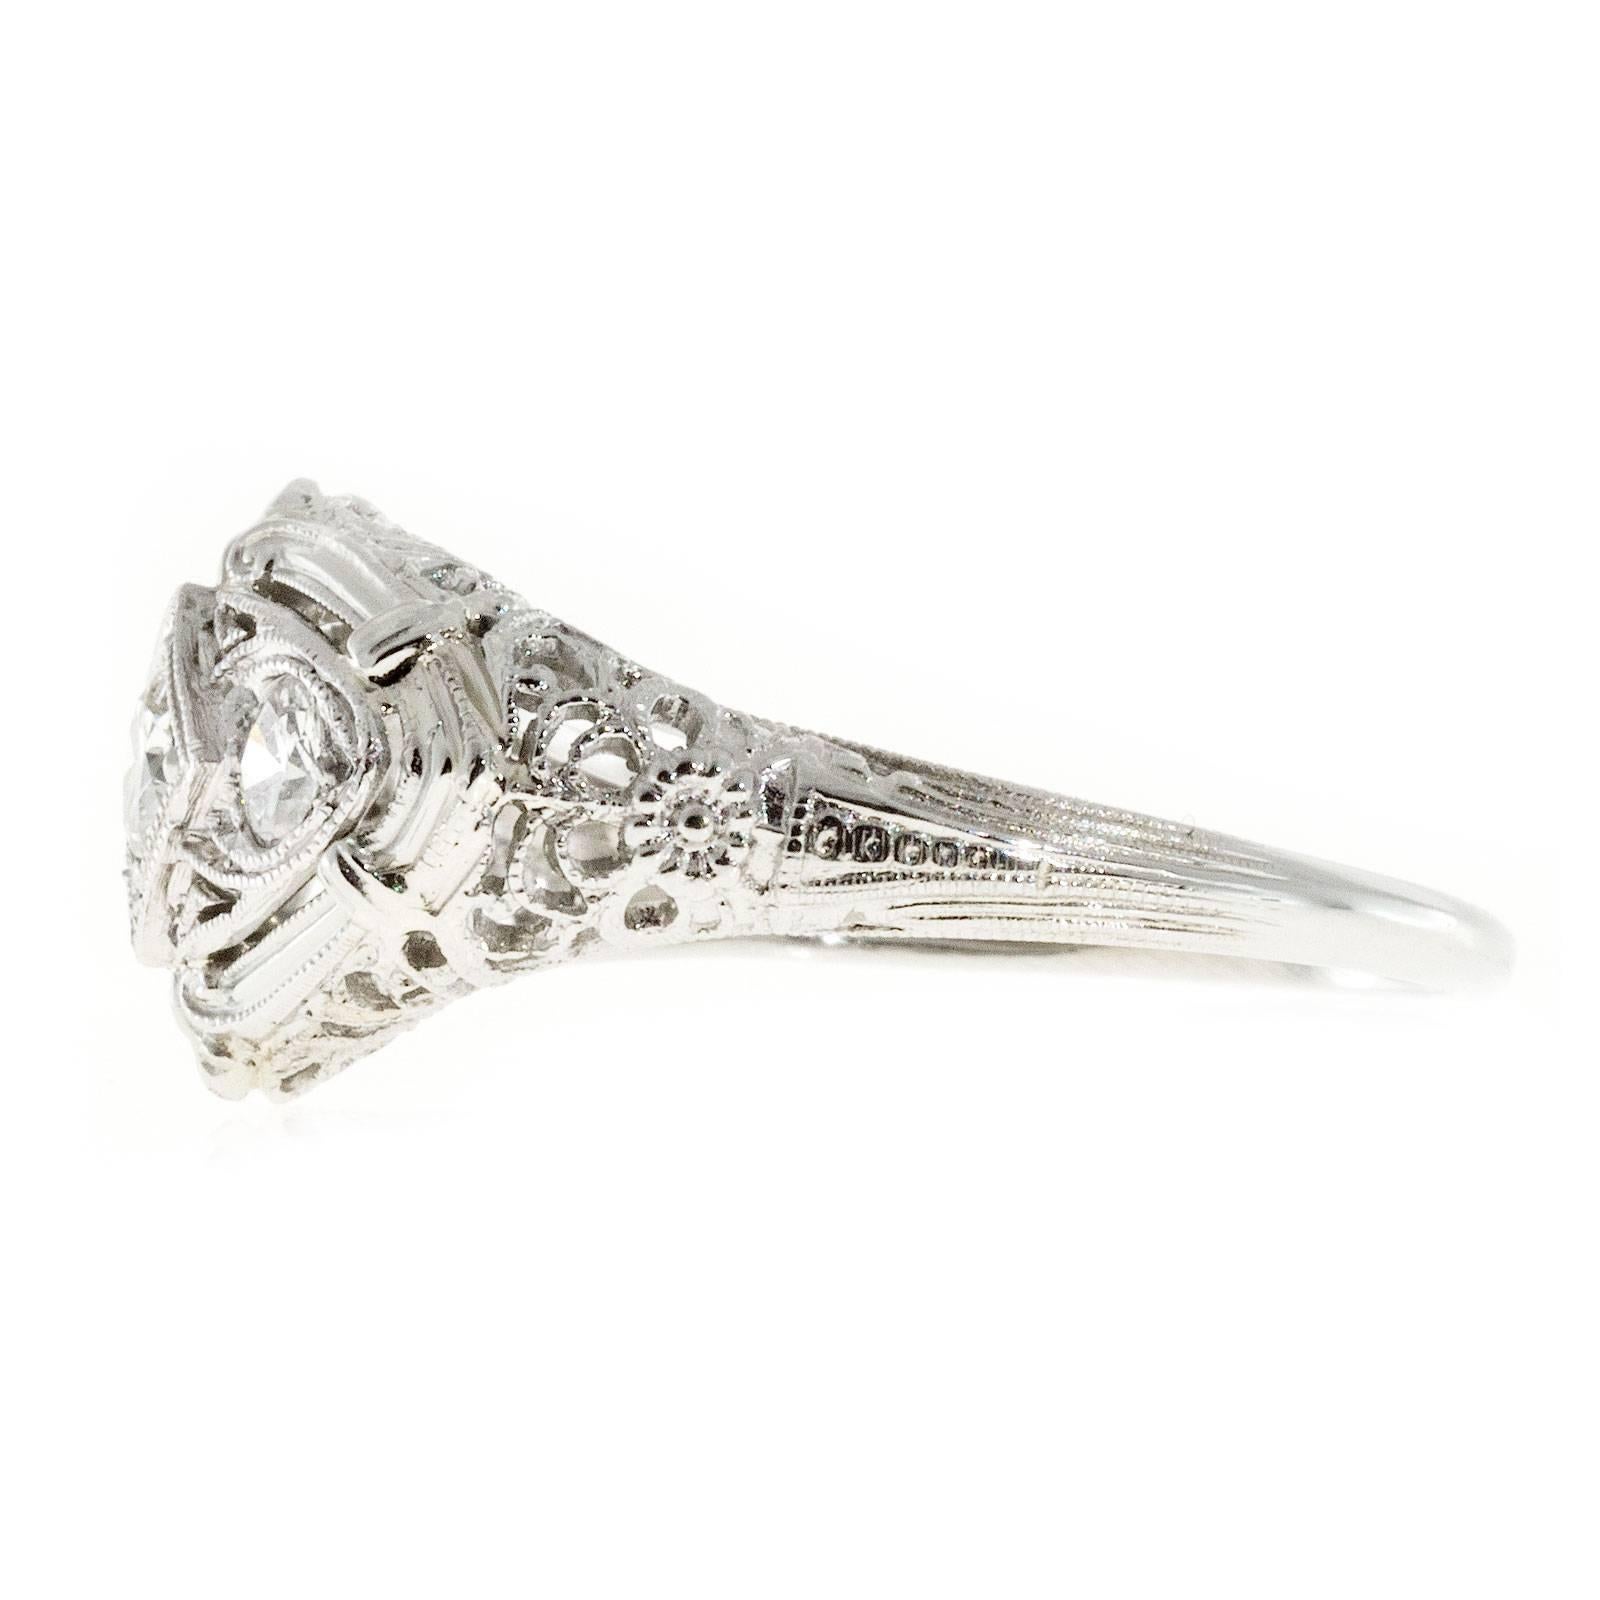 Original 1930's Art Deco pierced filigree engagement ring with 18k white gold base and Platinum diamond top. 

3 round brilliant cut diamonds, approx. total weight .40cts, F, VS1 to VS2
18k white gold and Platinum
Stamped: 18k
Width at top: